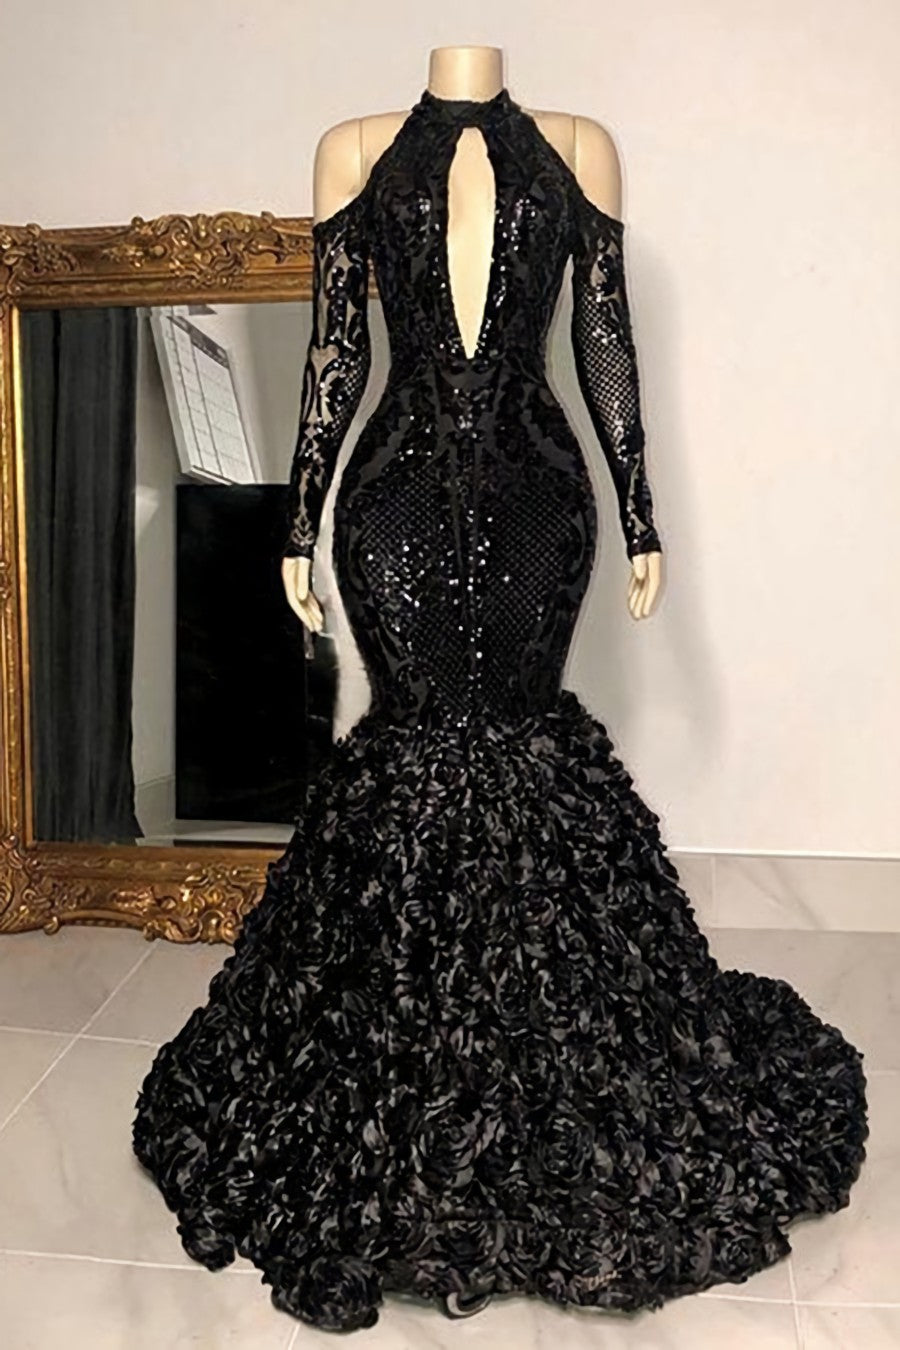 Dignified Black Halter Long Sleeve Transparent Lace Sequin Mermaid Corset Prom Dresses outfit, Bridesmaid Dresses With Lace